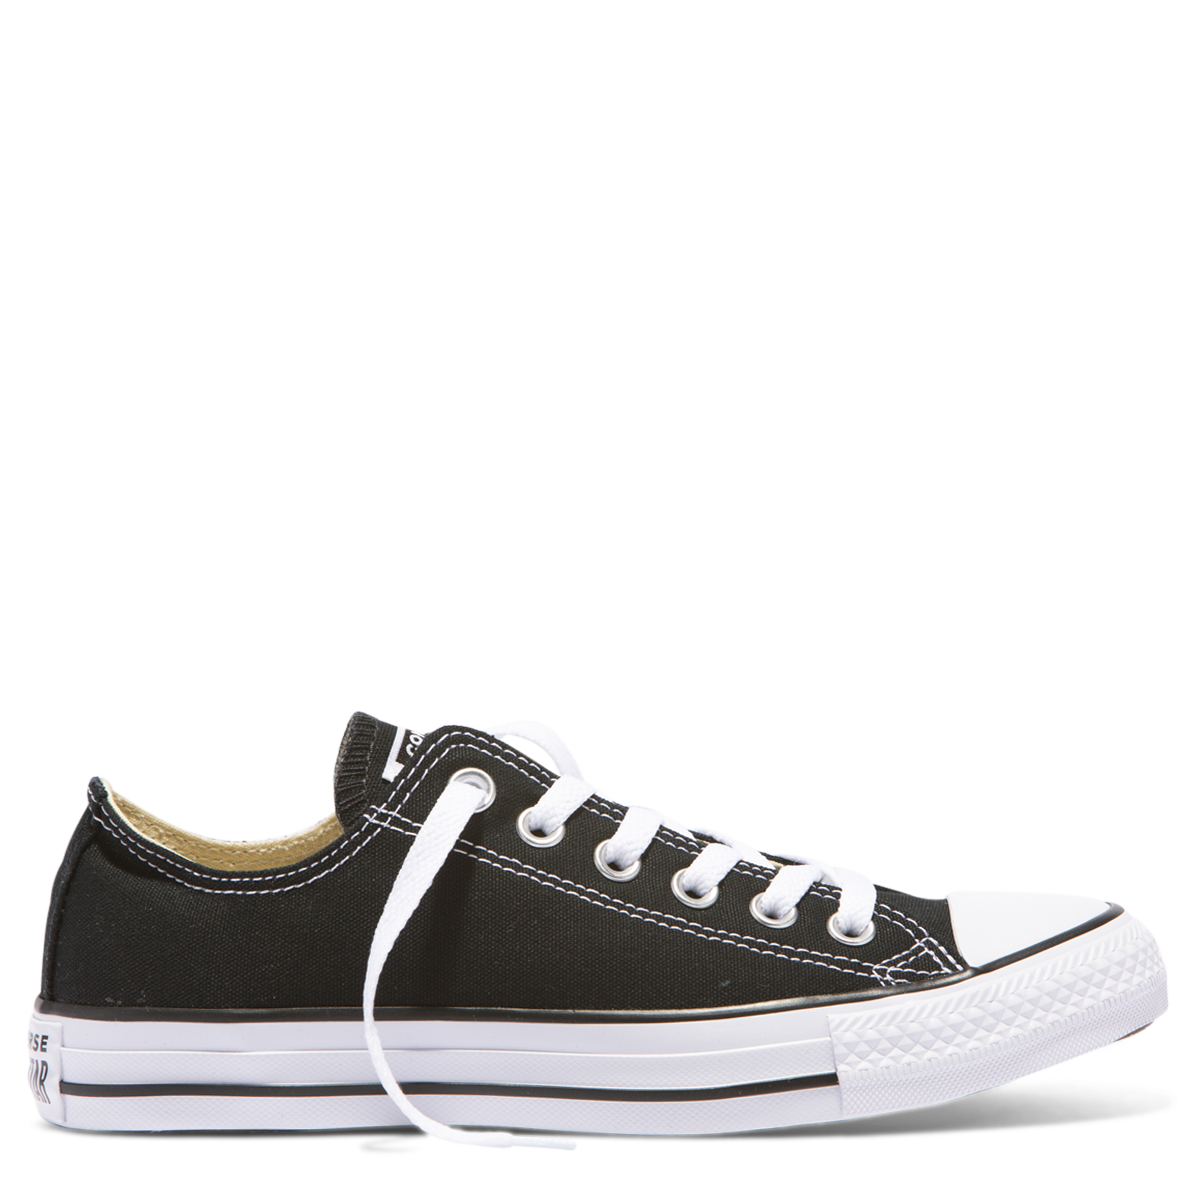 CHUCK TAYLOR ALL STAR LOW